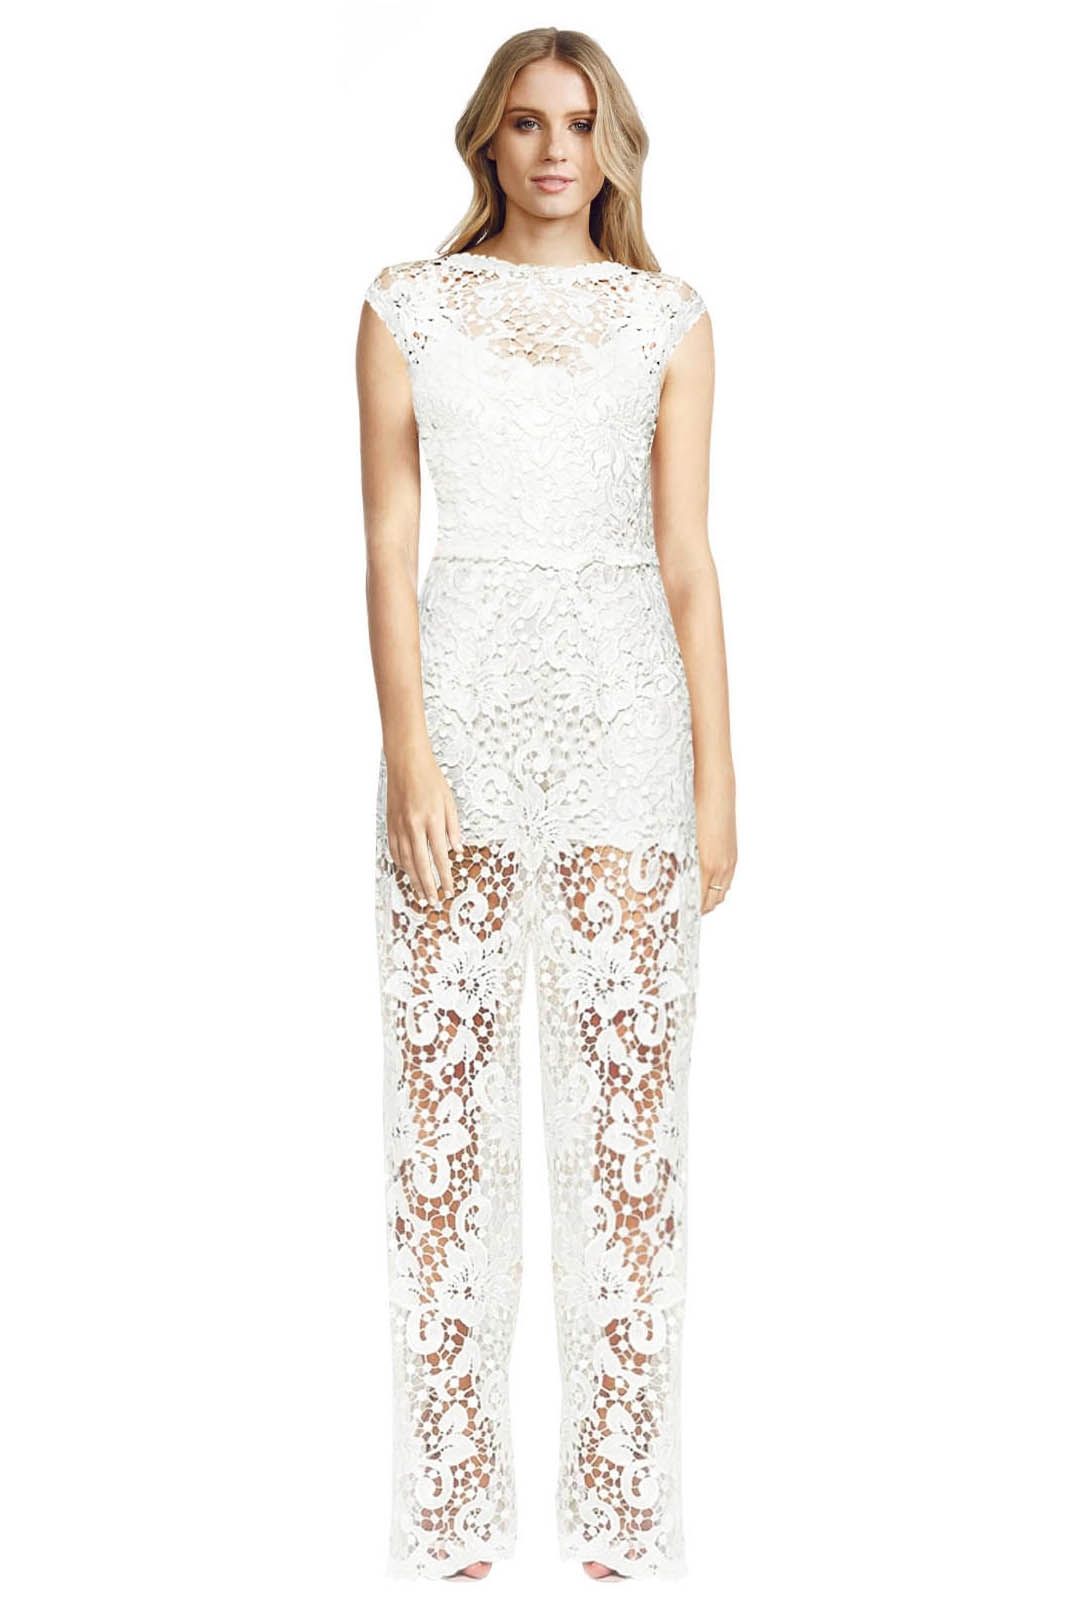 Body Frock - Brides Orchid Jumpsuit -  White - Front